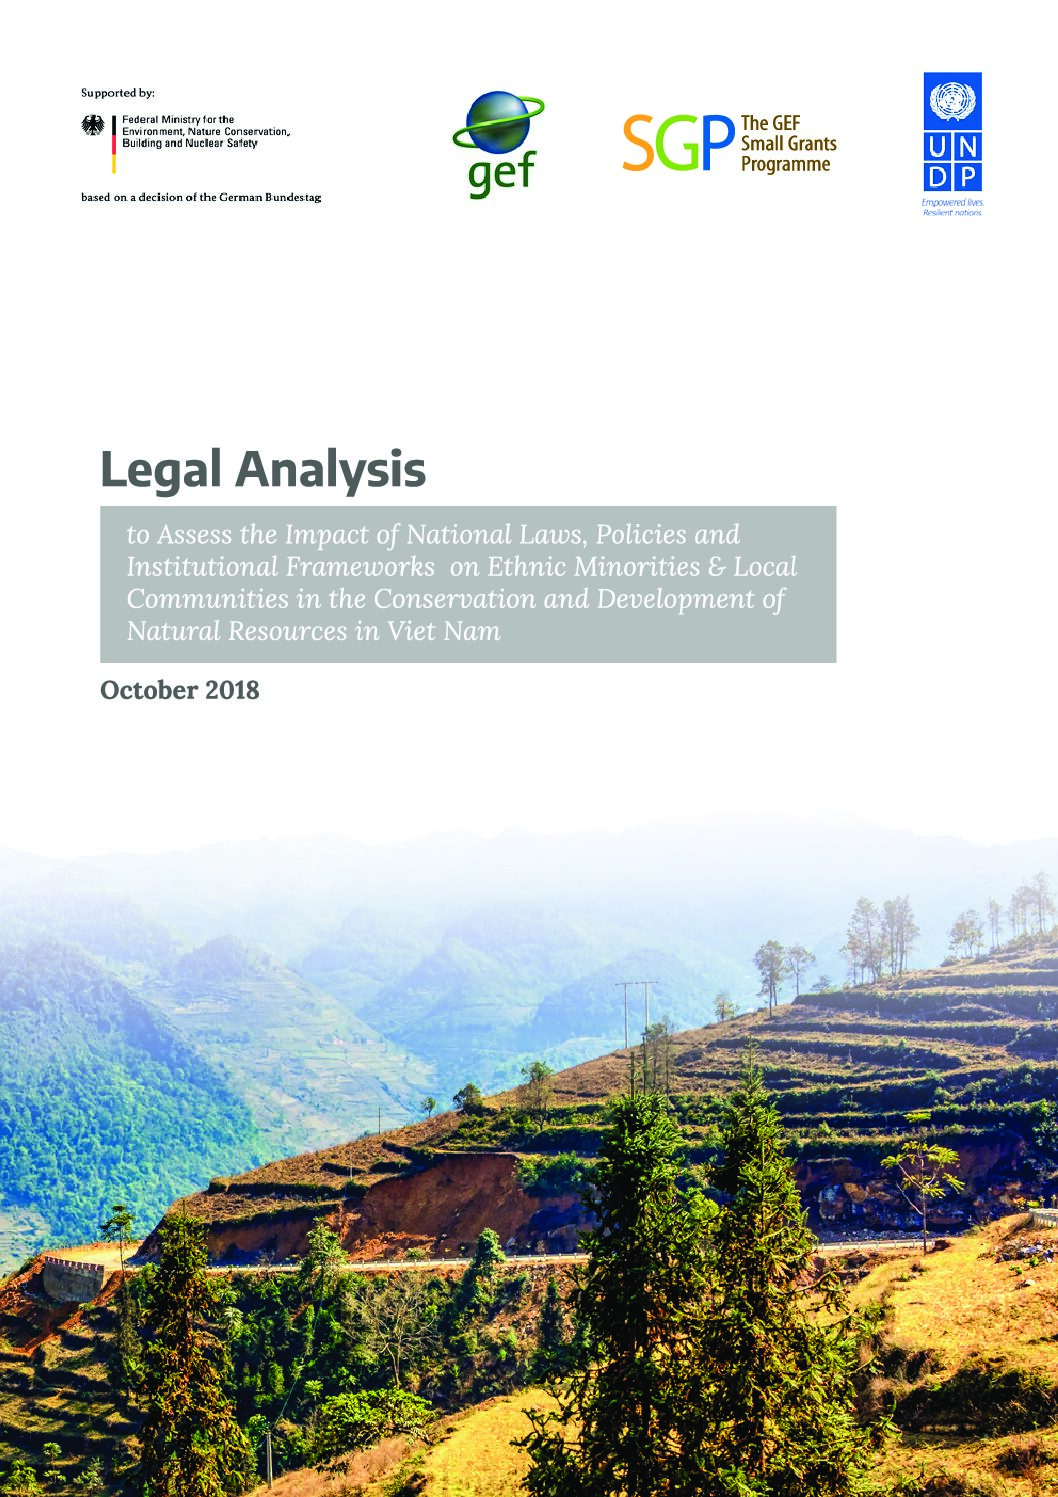 Legal Analysis to Assess the Impact of National Laws, Policies and Institutional Frameworks on Ethnic Minorities & Local Communities in the Conservation and Development of Natural Resources in Viet Nam